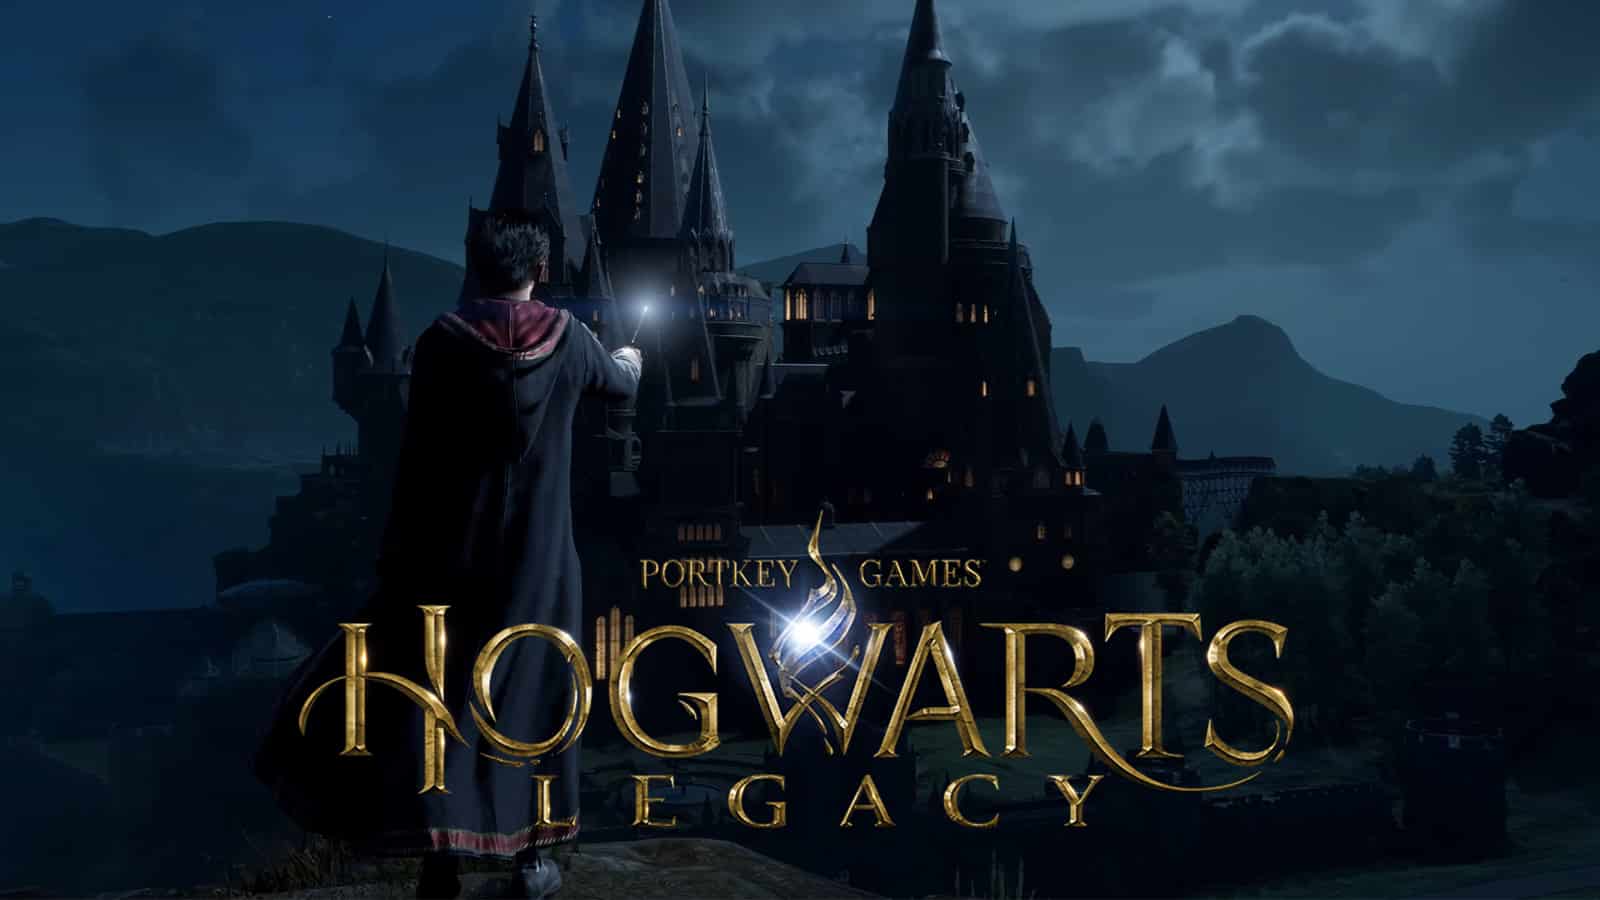 Harry Potter': Cool Interesting Things to Learn About Hogwarts